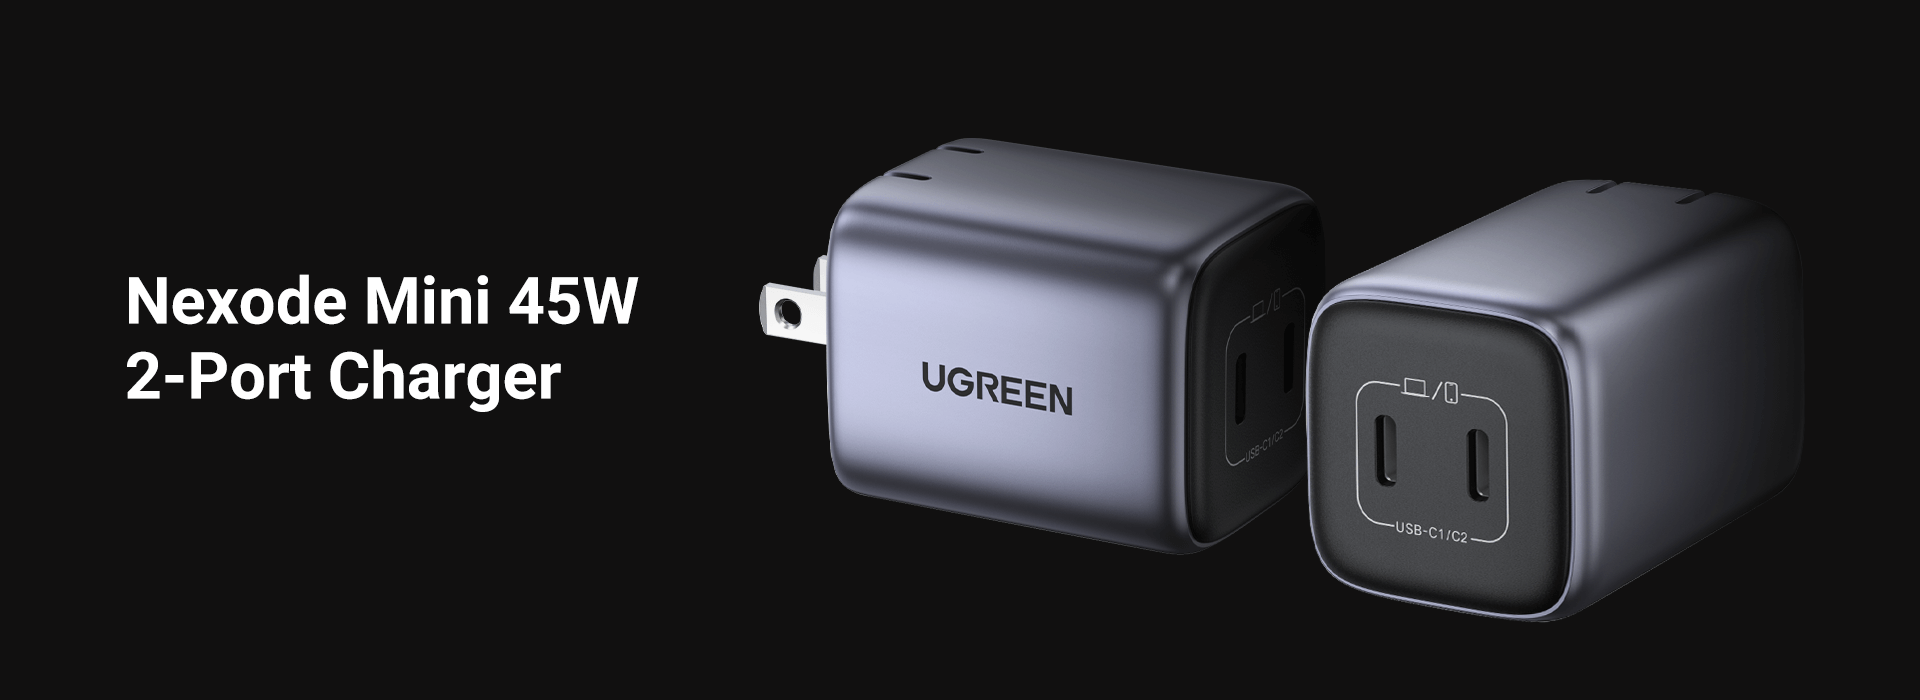 UGREEN Nexode 45W Charger 2022 REVIEW - MacSources